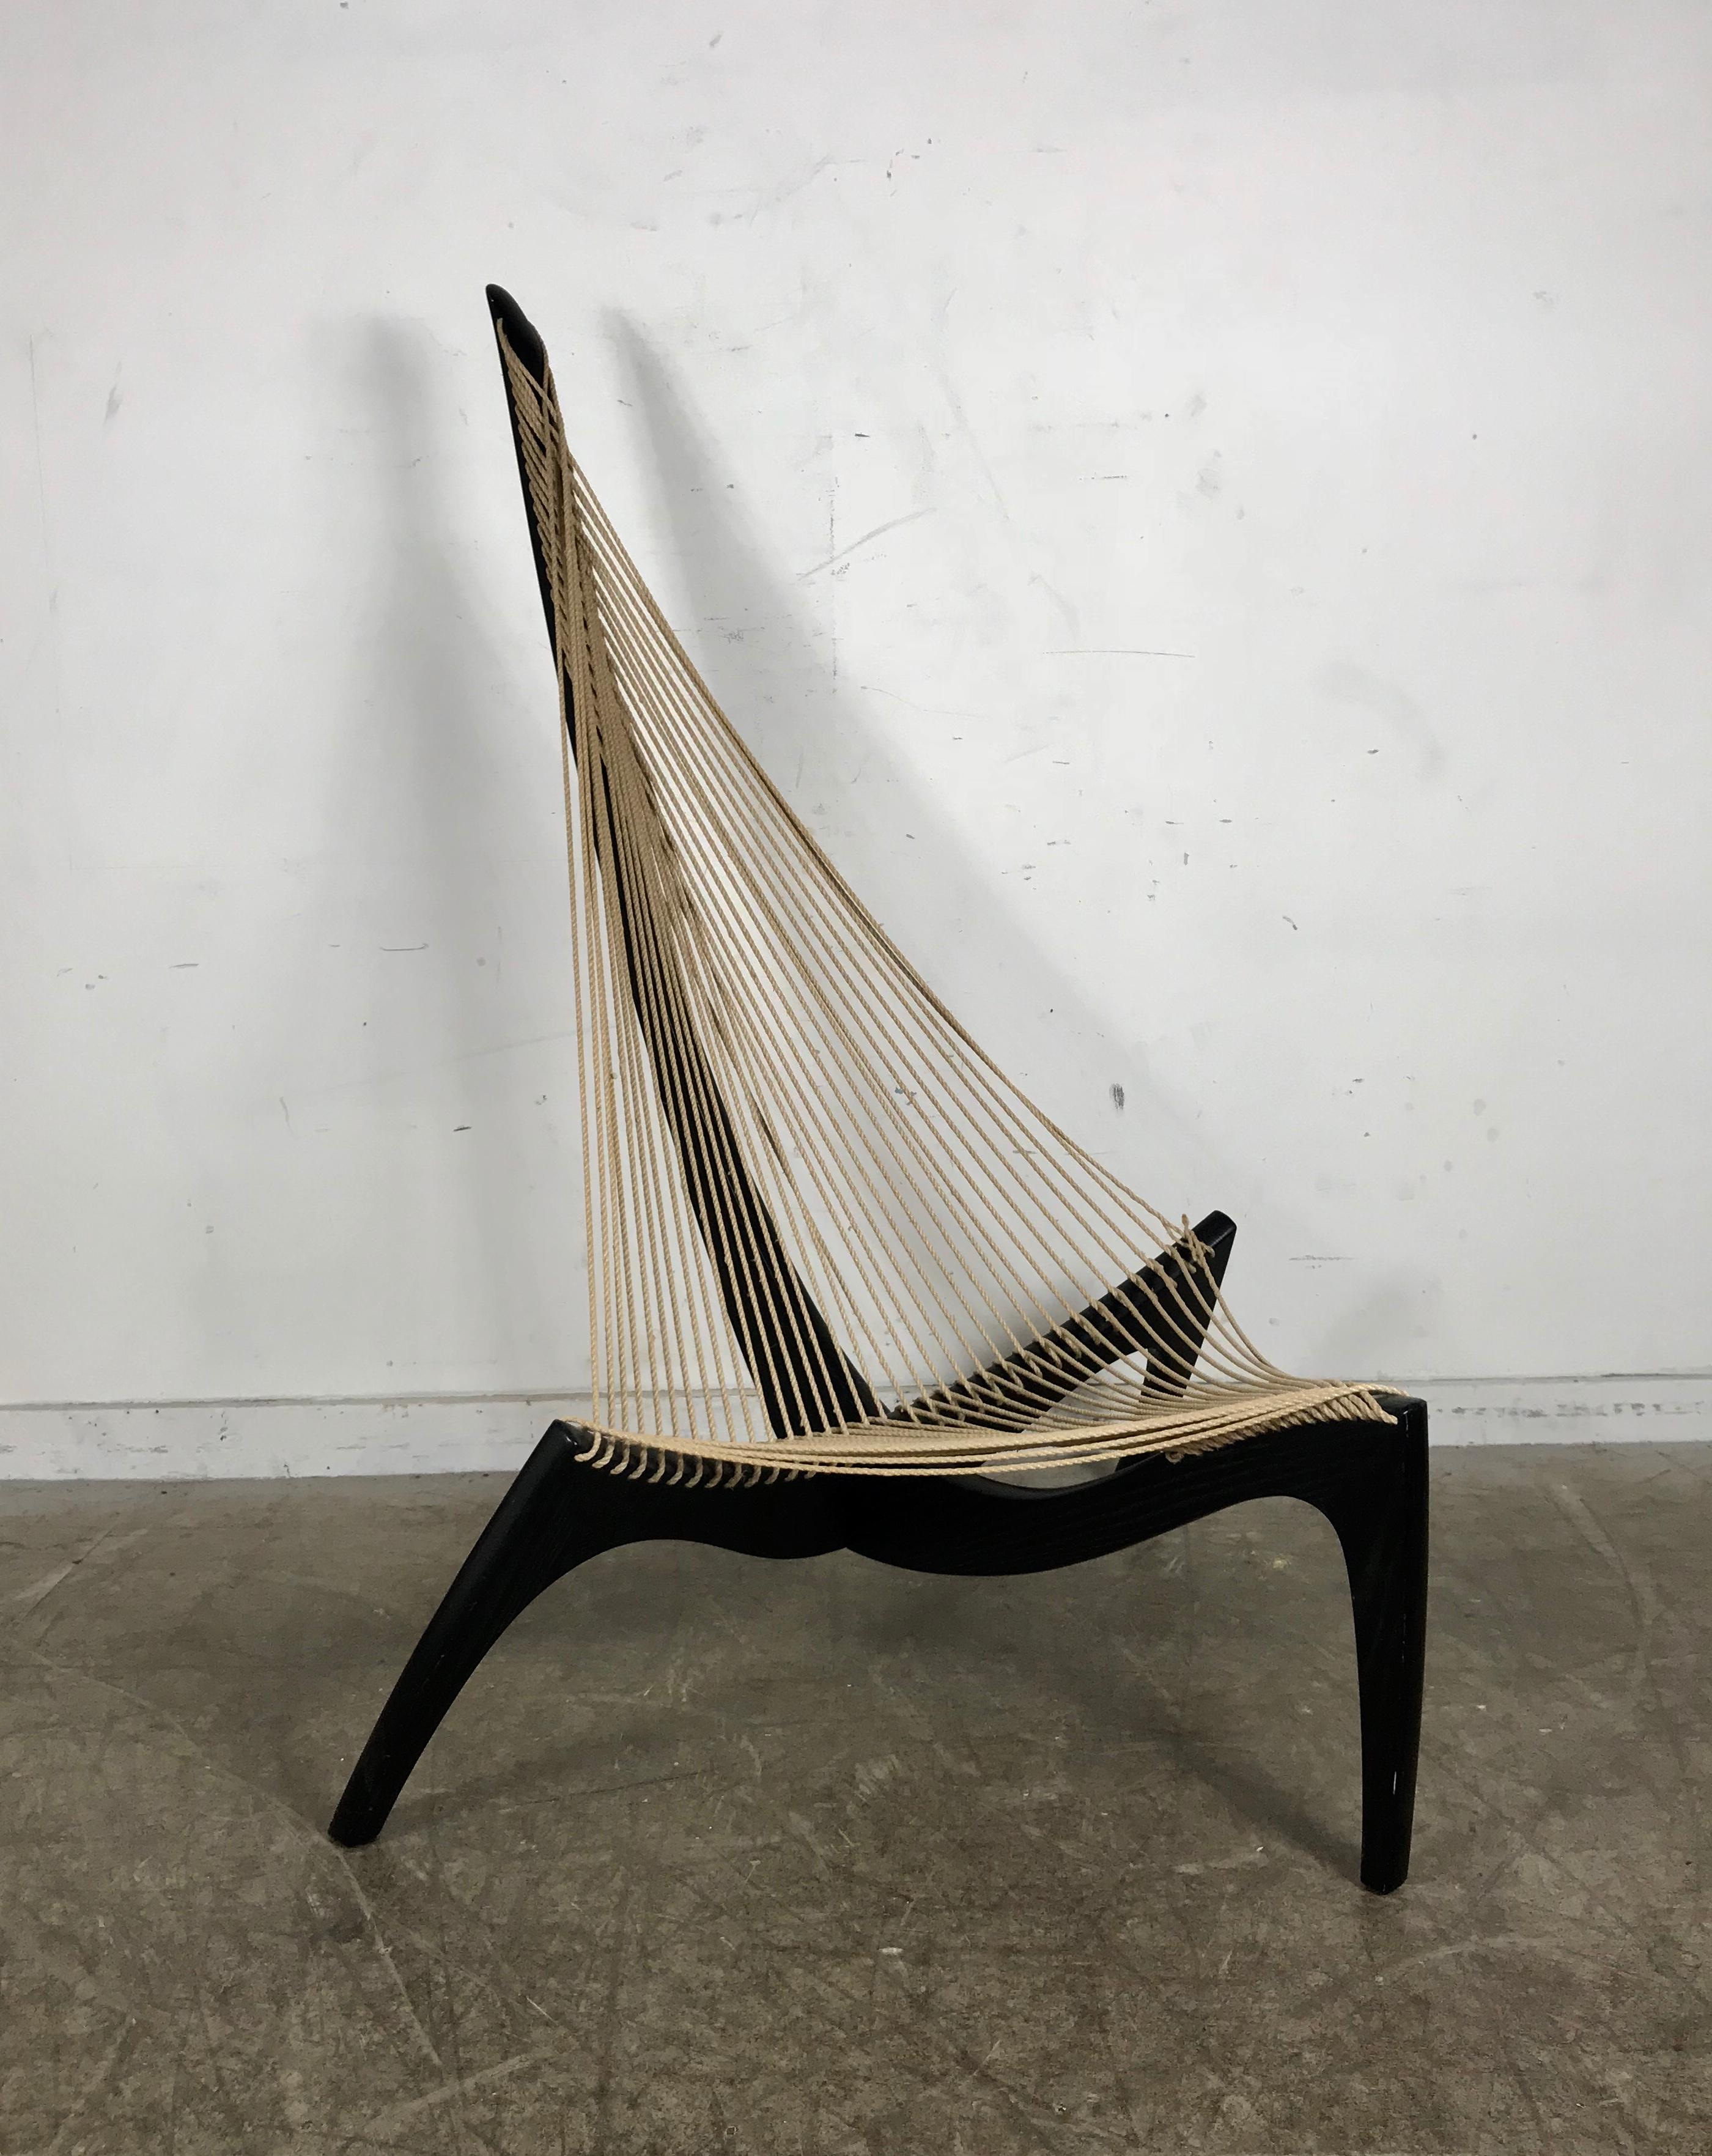 Jorgen Hovelskov harp chair form 1970. This example retains its original ebonized ash finish and retains its original rope, flag halyard. Classic Mid-Cerntury Modern, stunning design and much more comfortable then it looks, hand delivery avail to